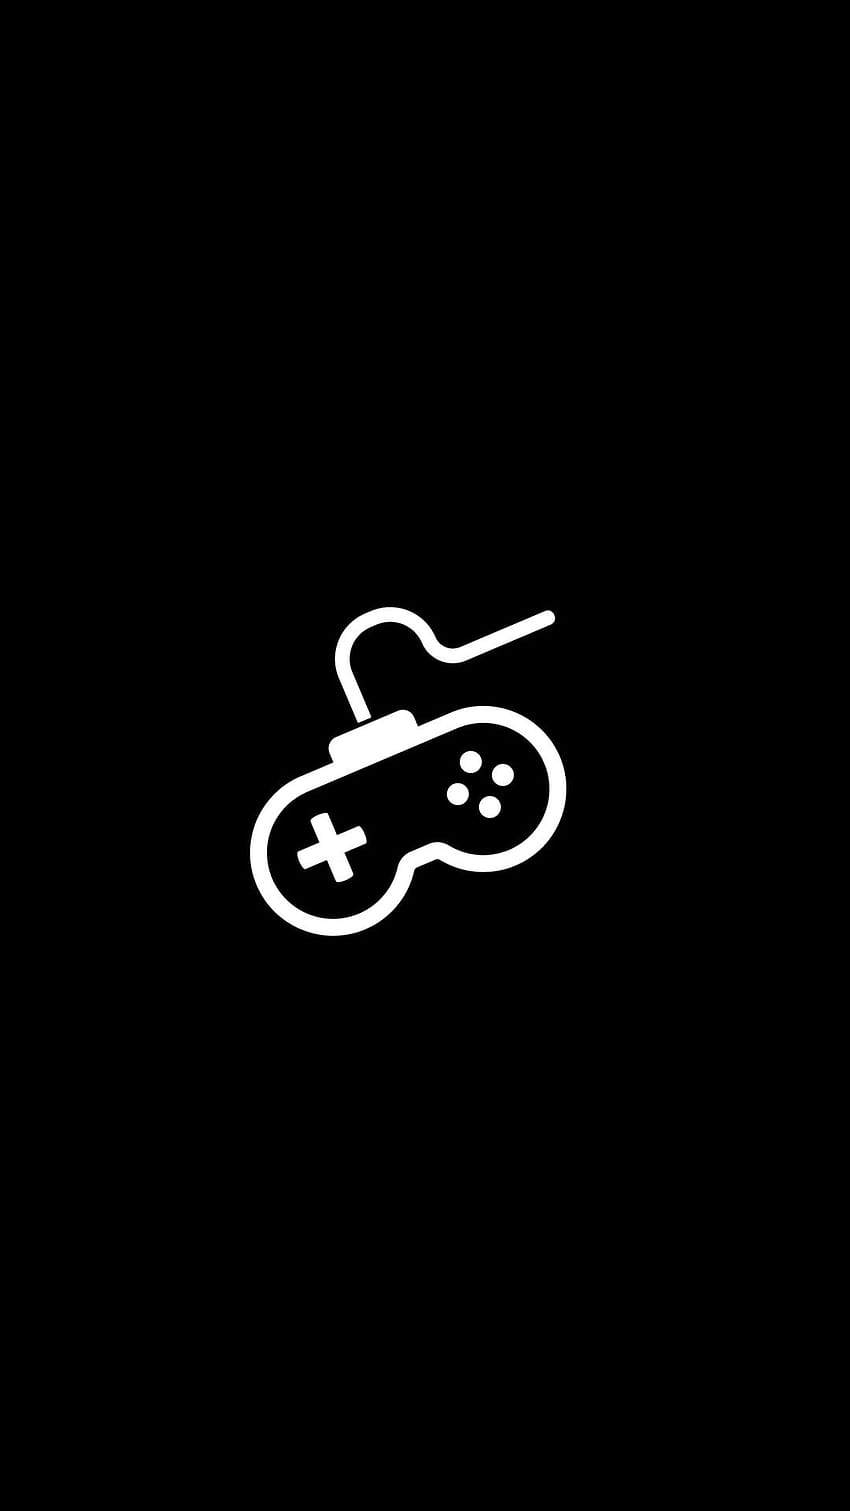 1080x1920 Gaming Controller Minimal Dark Iphone 7,6s,6 Plus, Pixel xl ,One Plus 3,3t,5 , Backgrounds, and, black gaming HD phone wallpaper